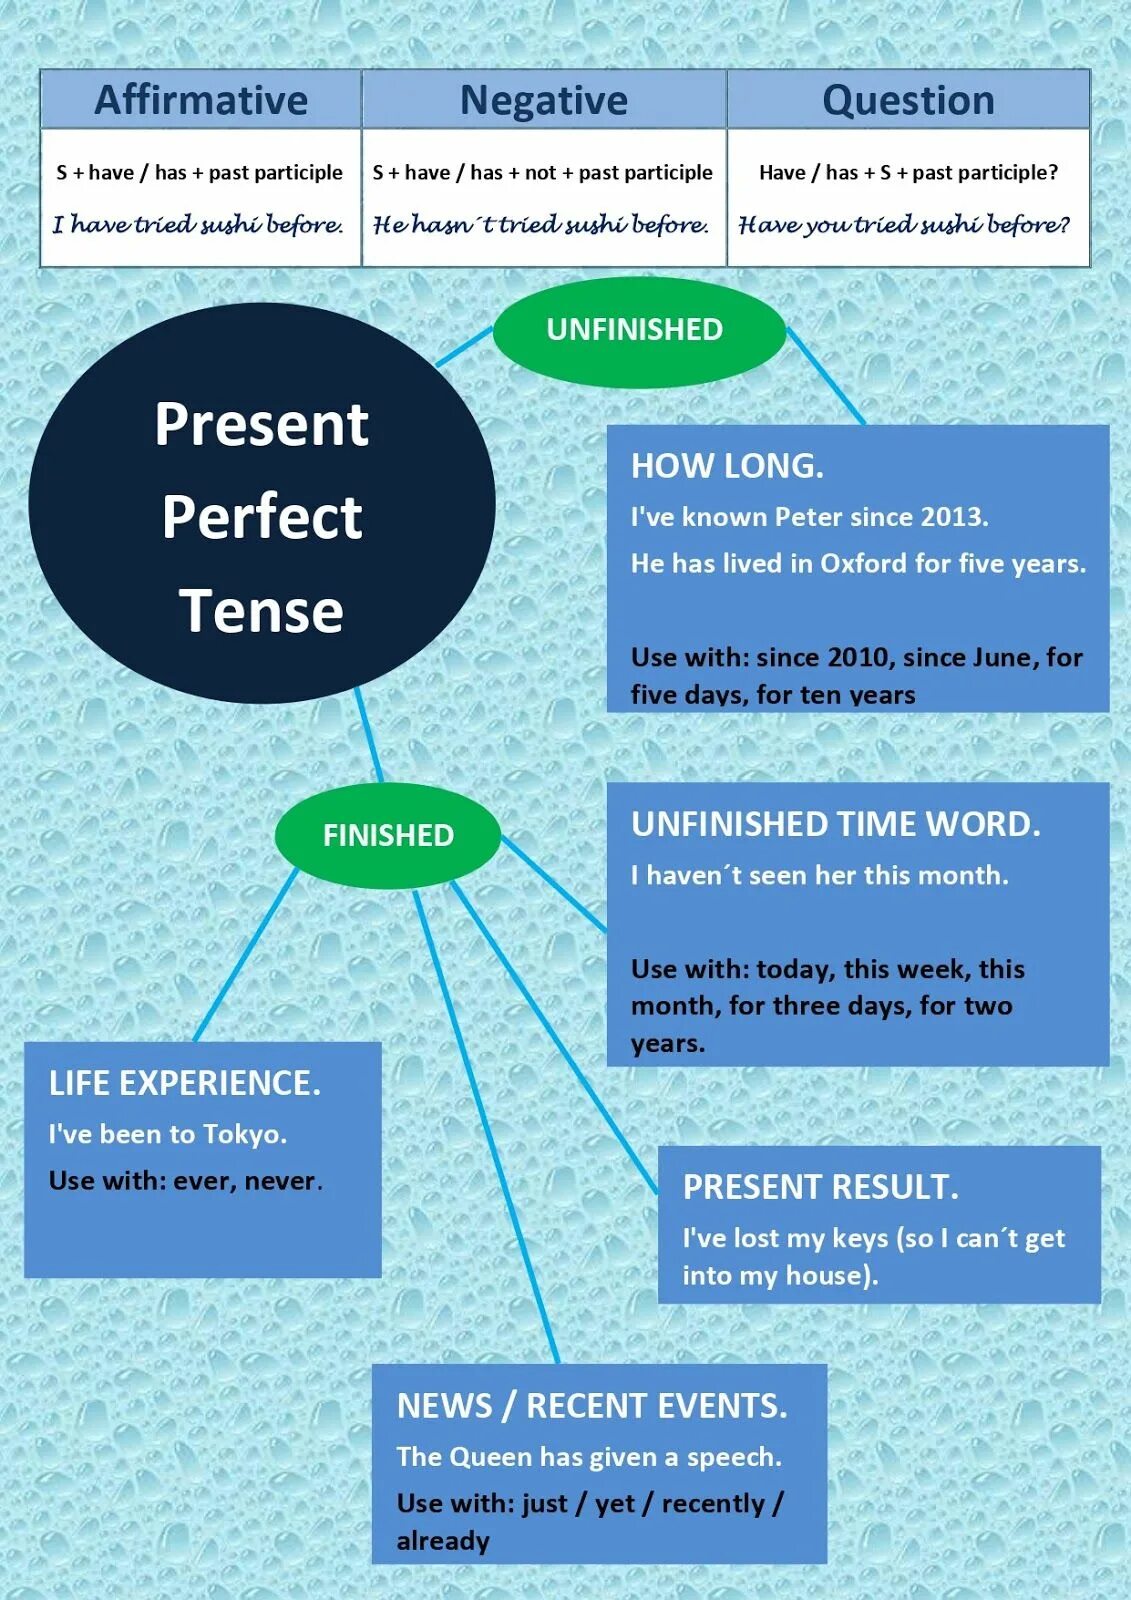 Experience presents. Презент Перфект. The perfect present. Present perfect задания. The present perfect Tense.